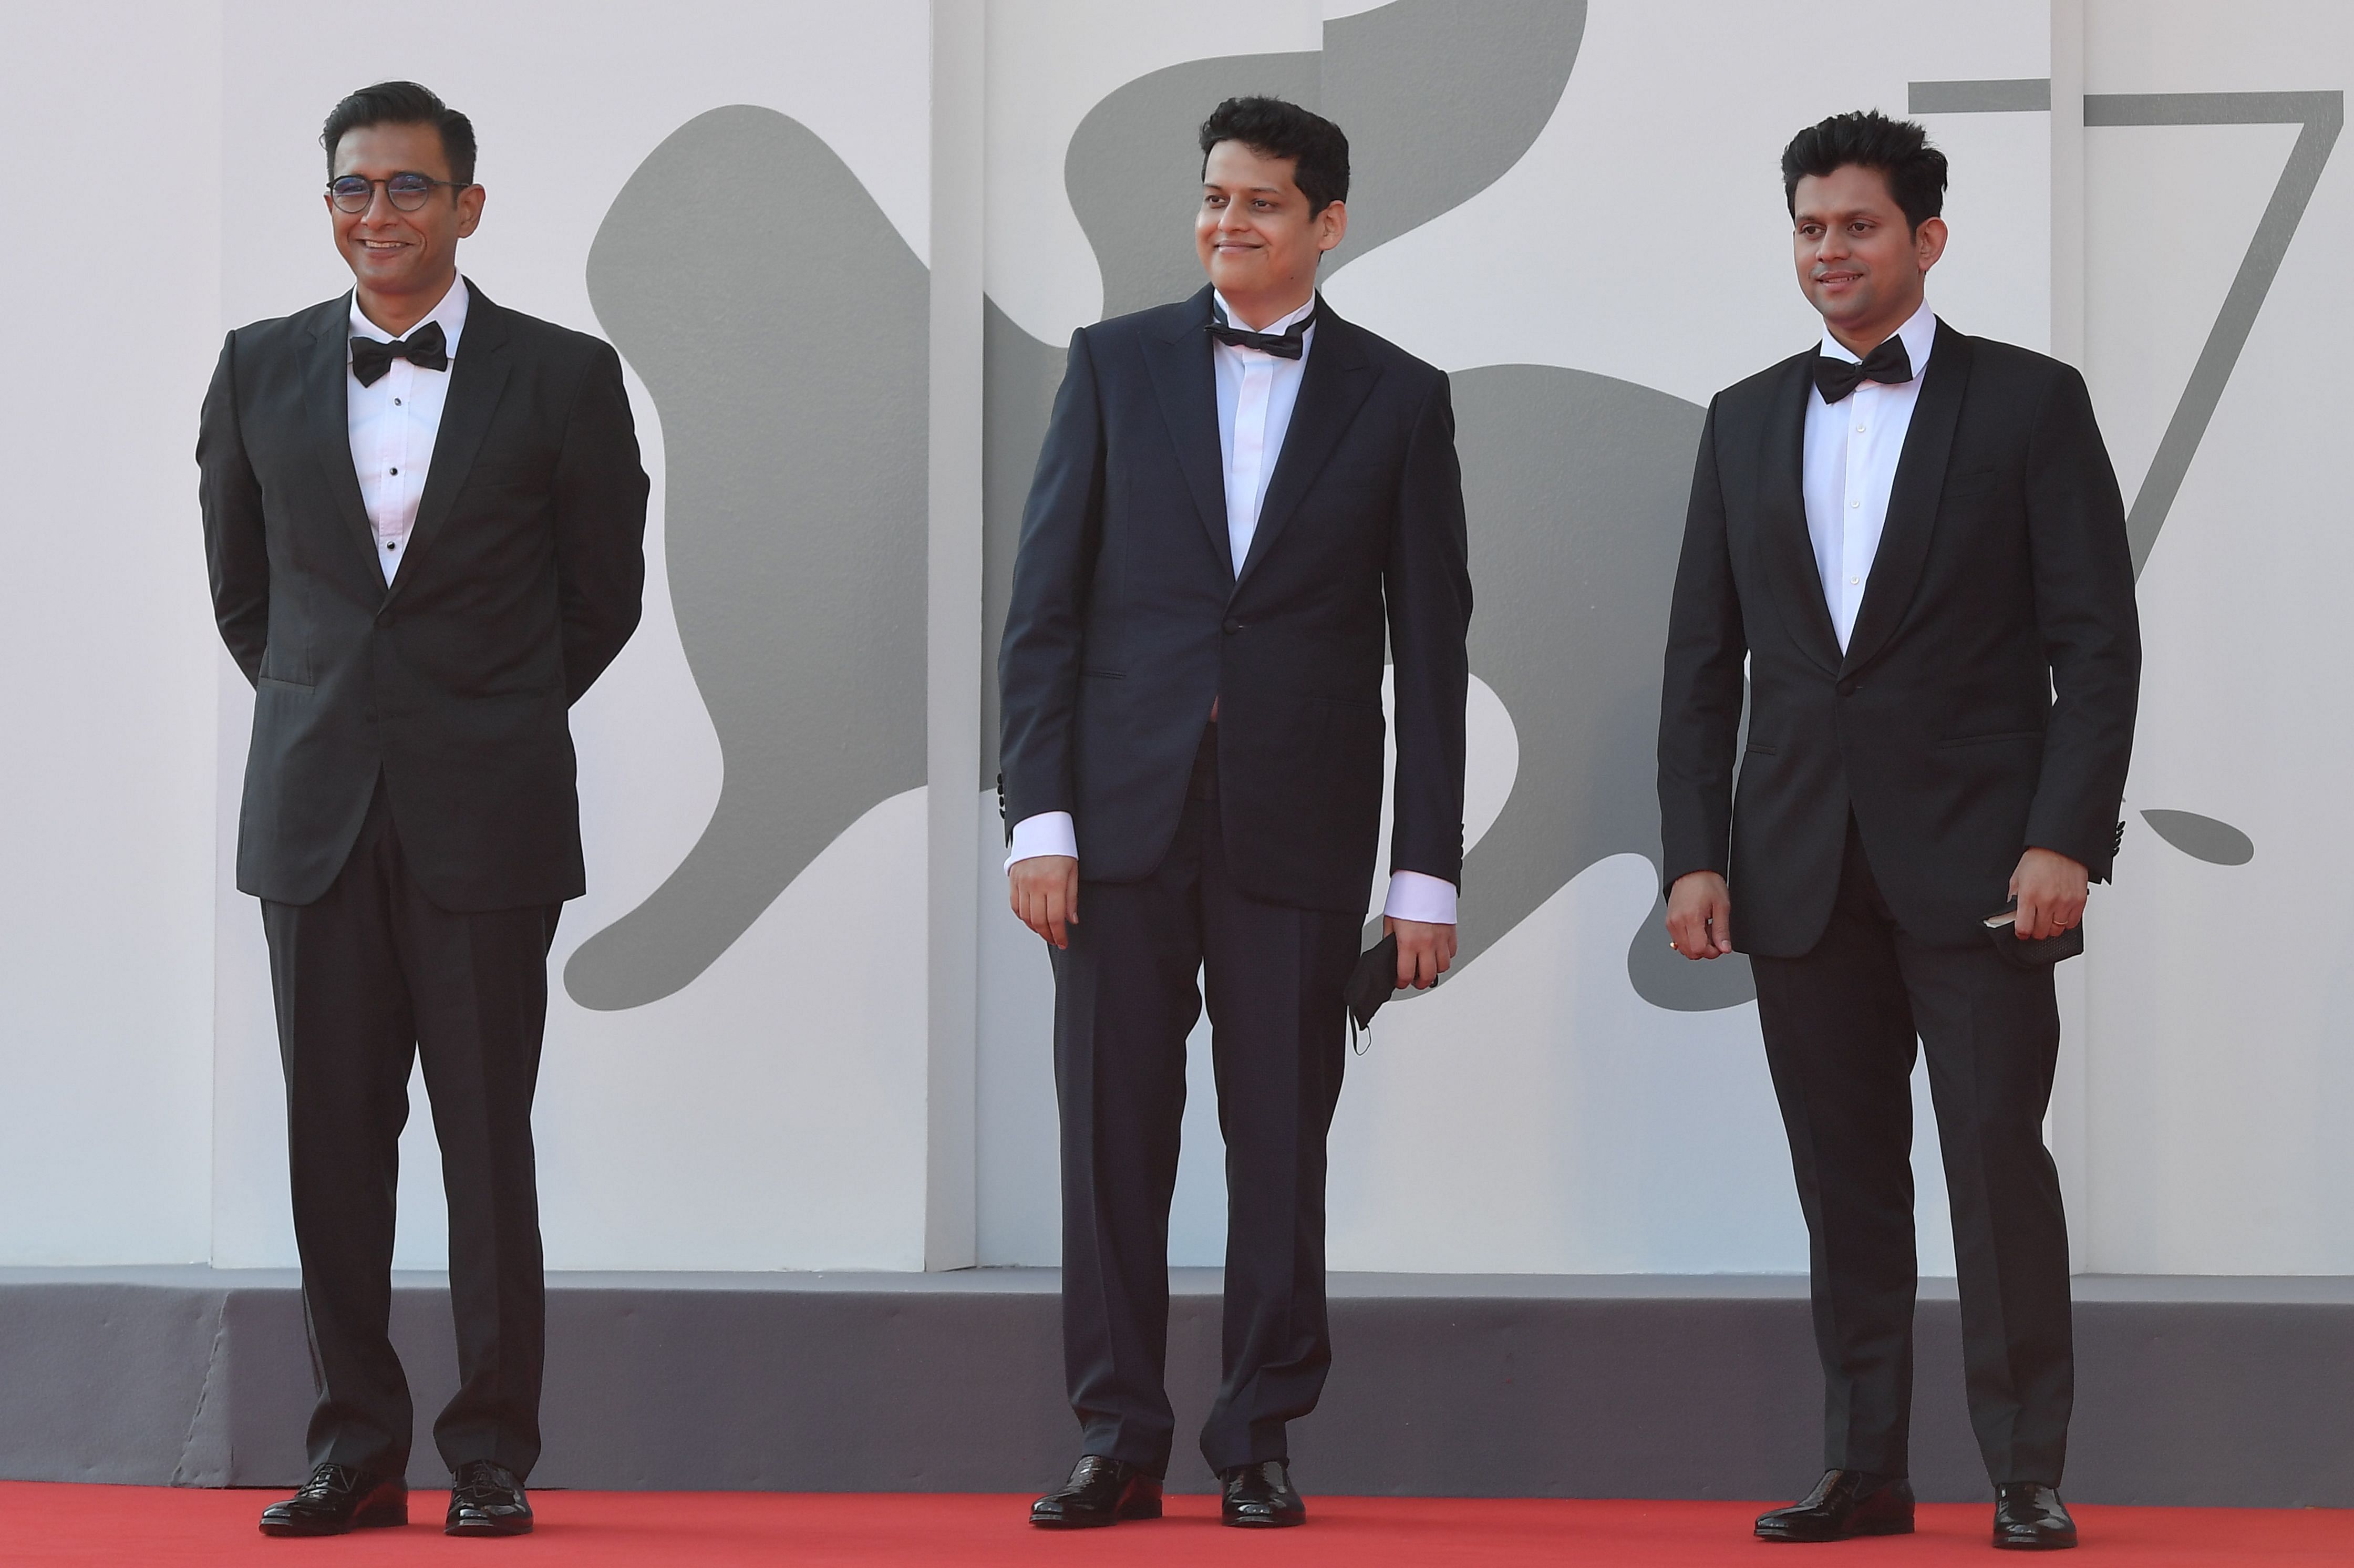 Producer Vivek Gomber, Chaitanya Tamhane and actor Aditya Modak at the screening of the film 'The Disciple' at the 77th Venice Film Festival, on September 4. AFP